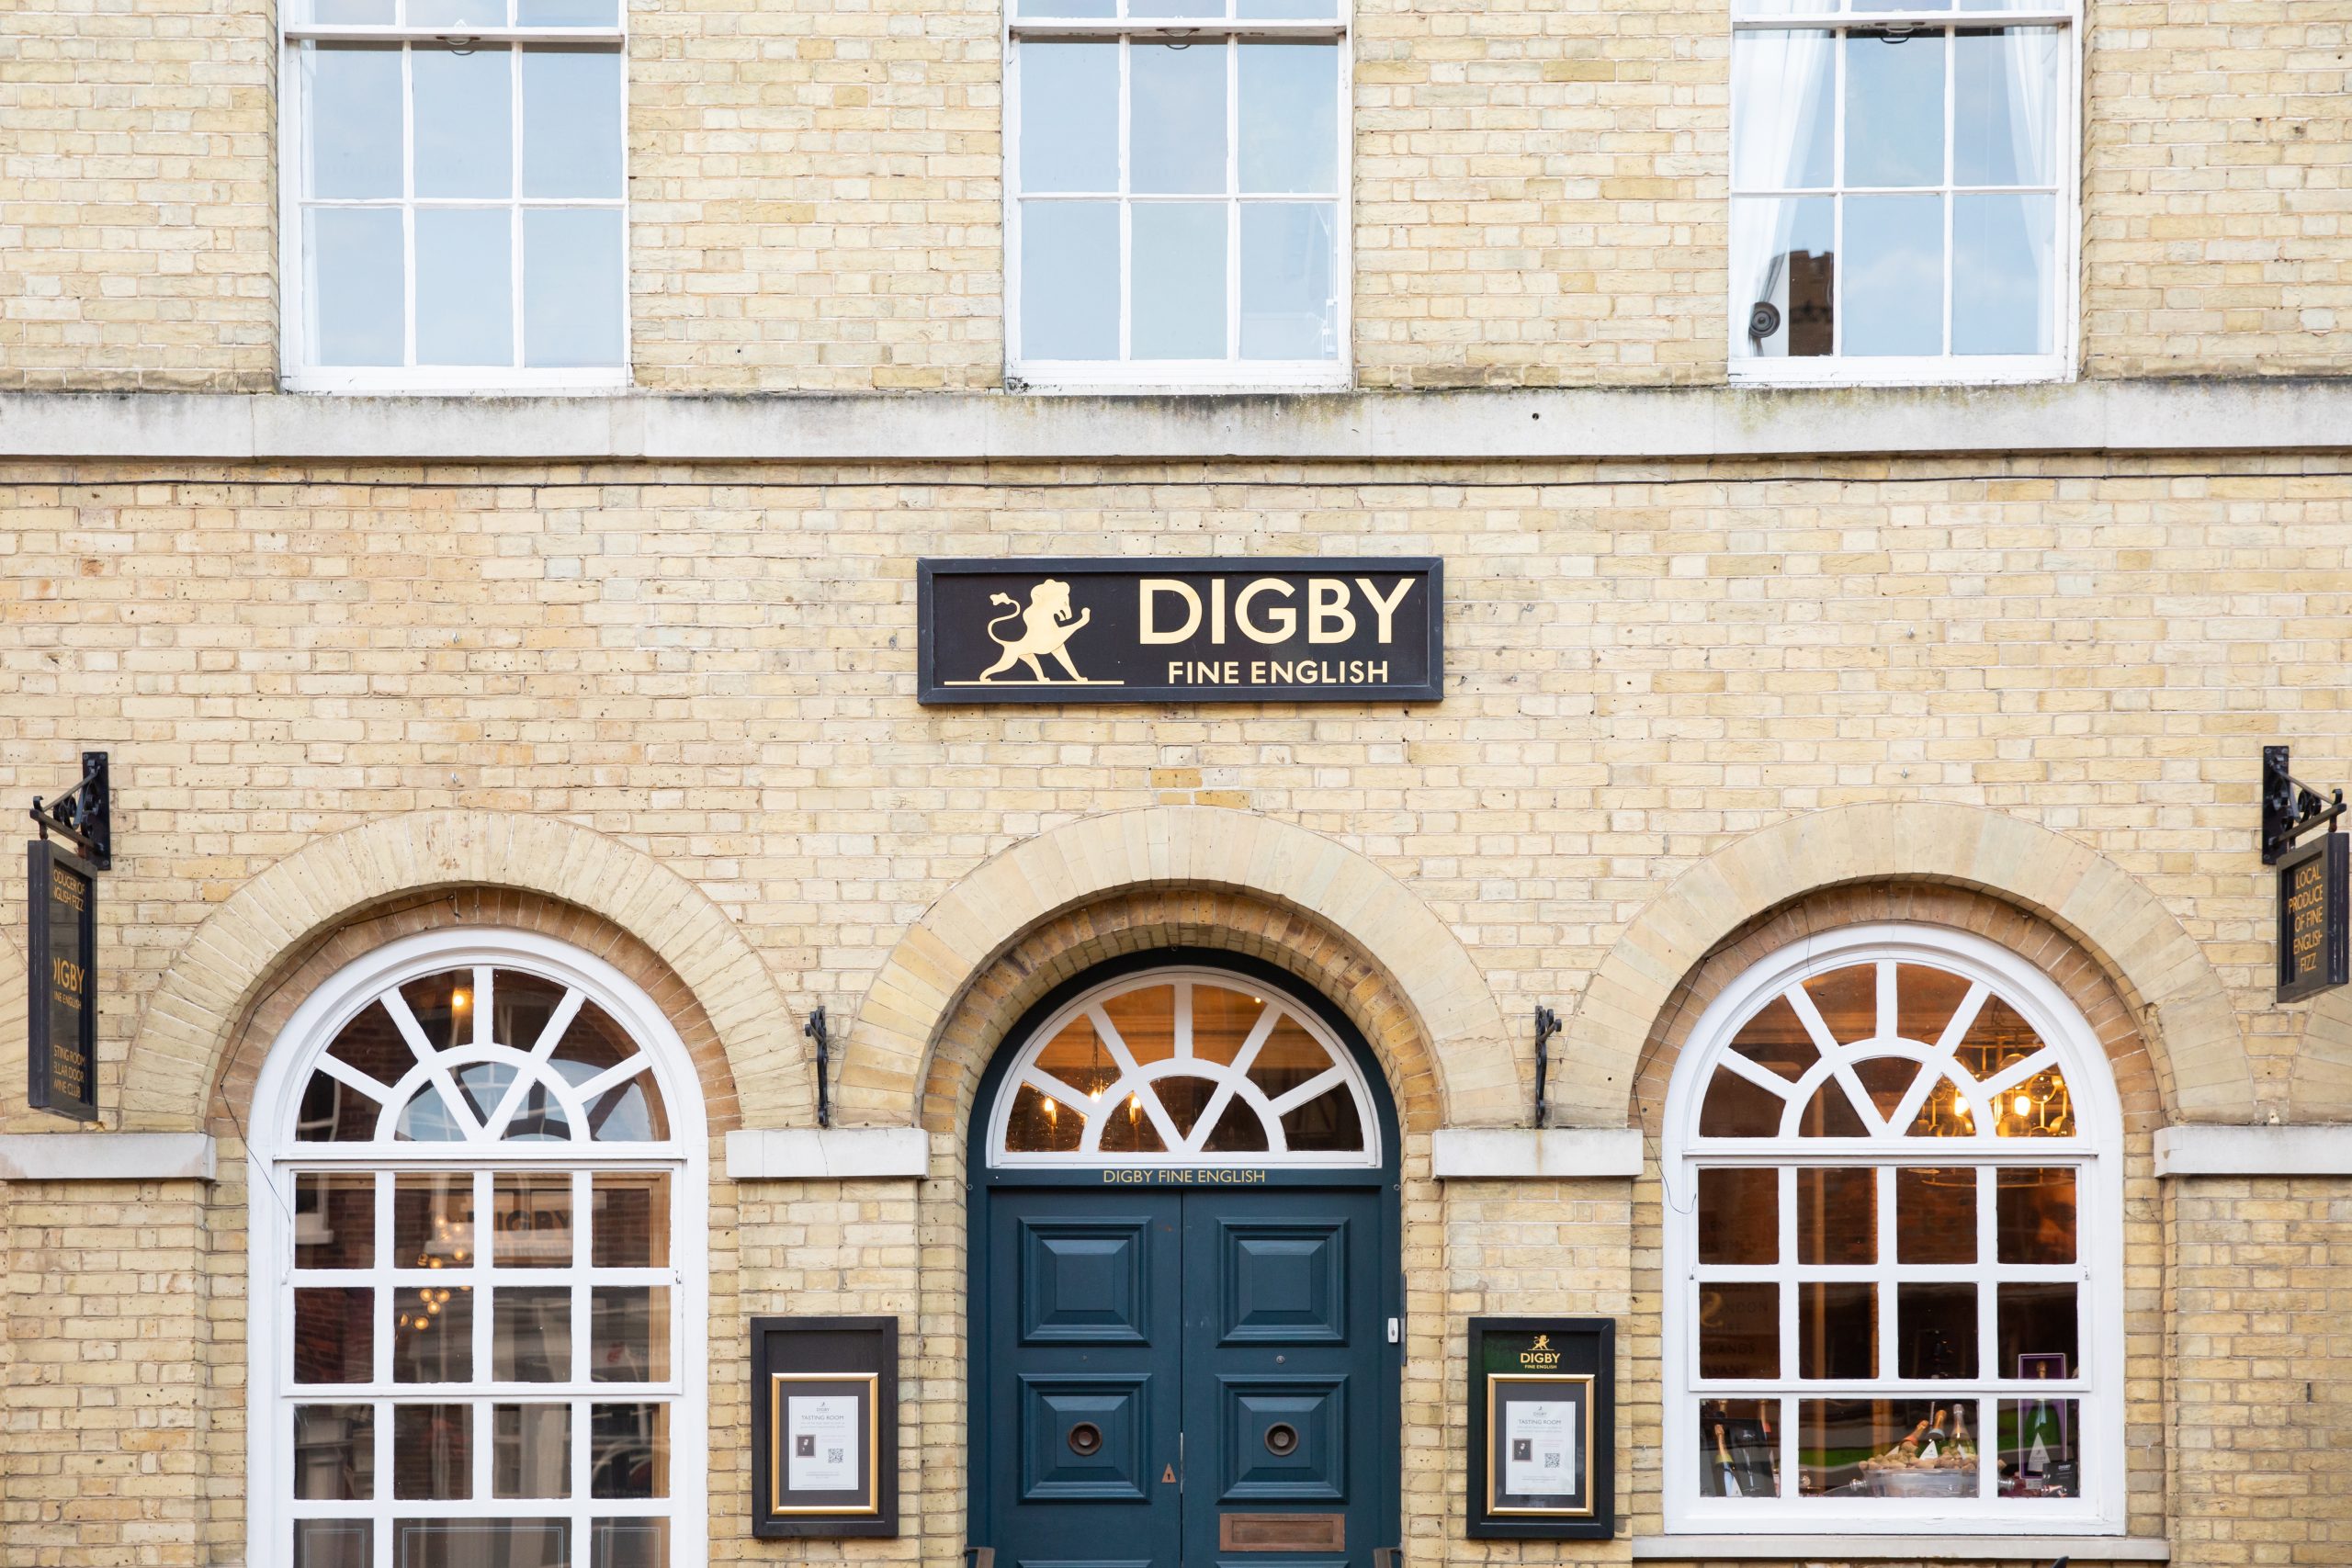 Exterior of the Digby Fine English Tasting Room in Arundel, West Sussex.